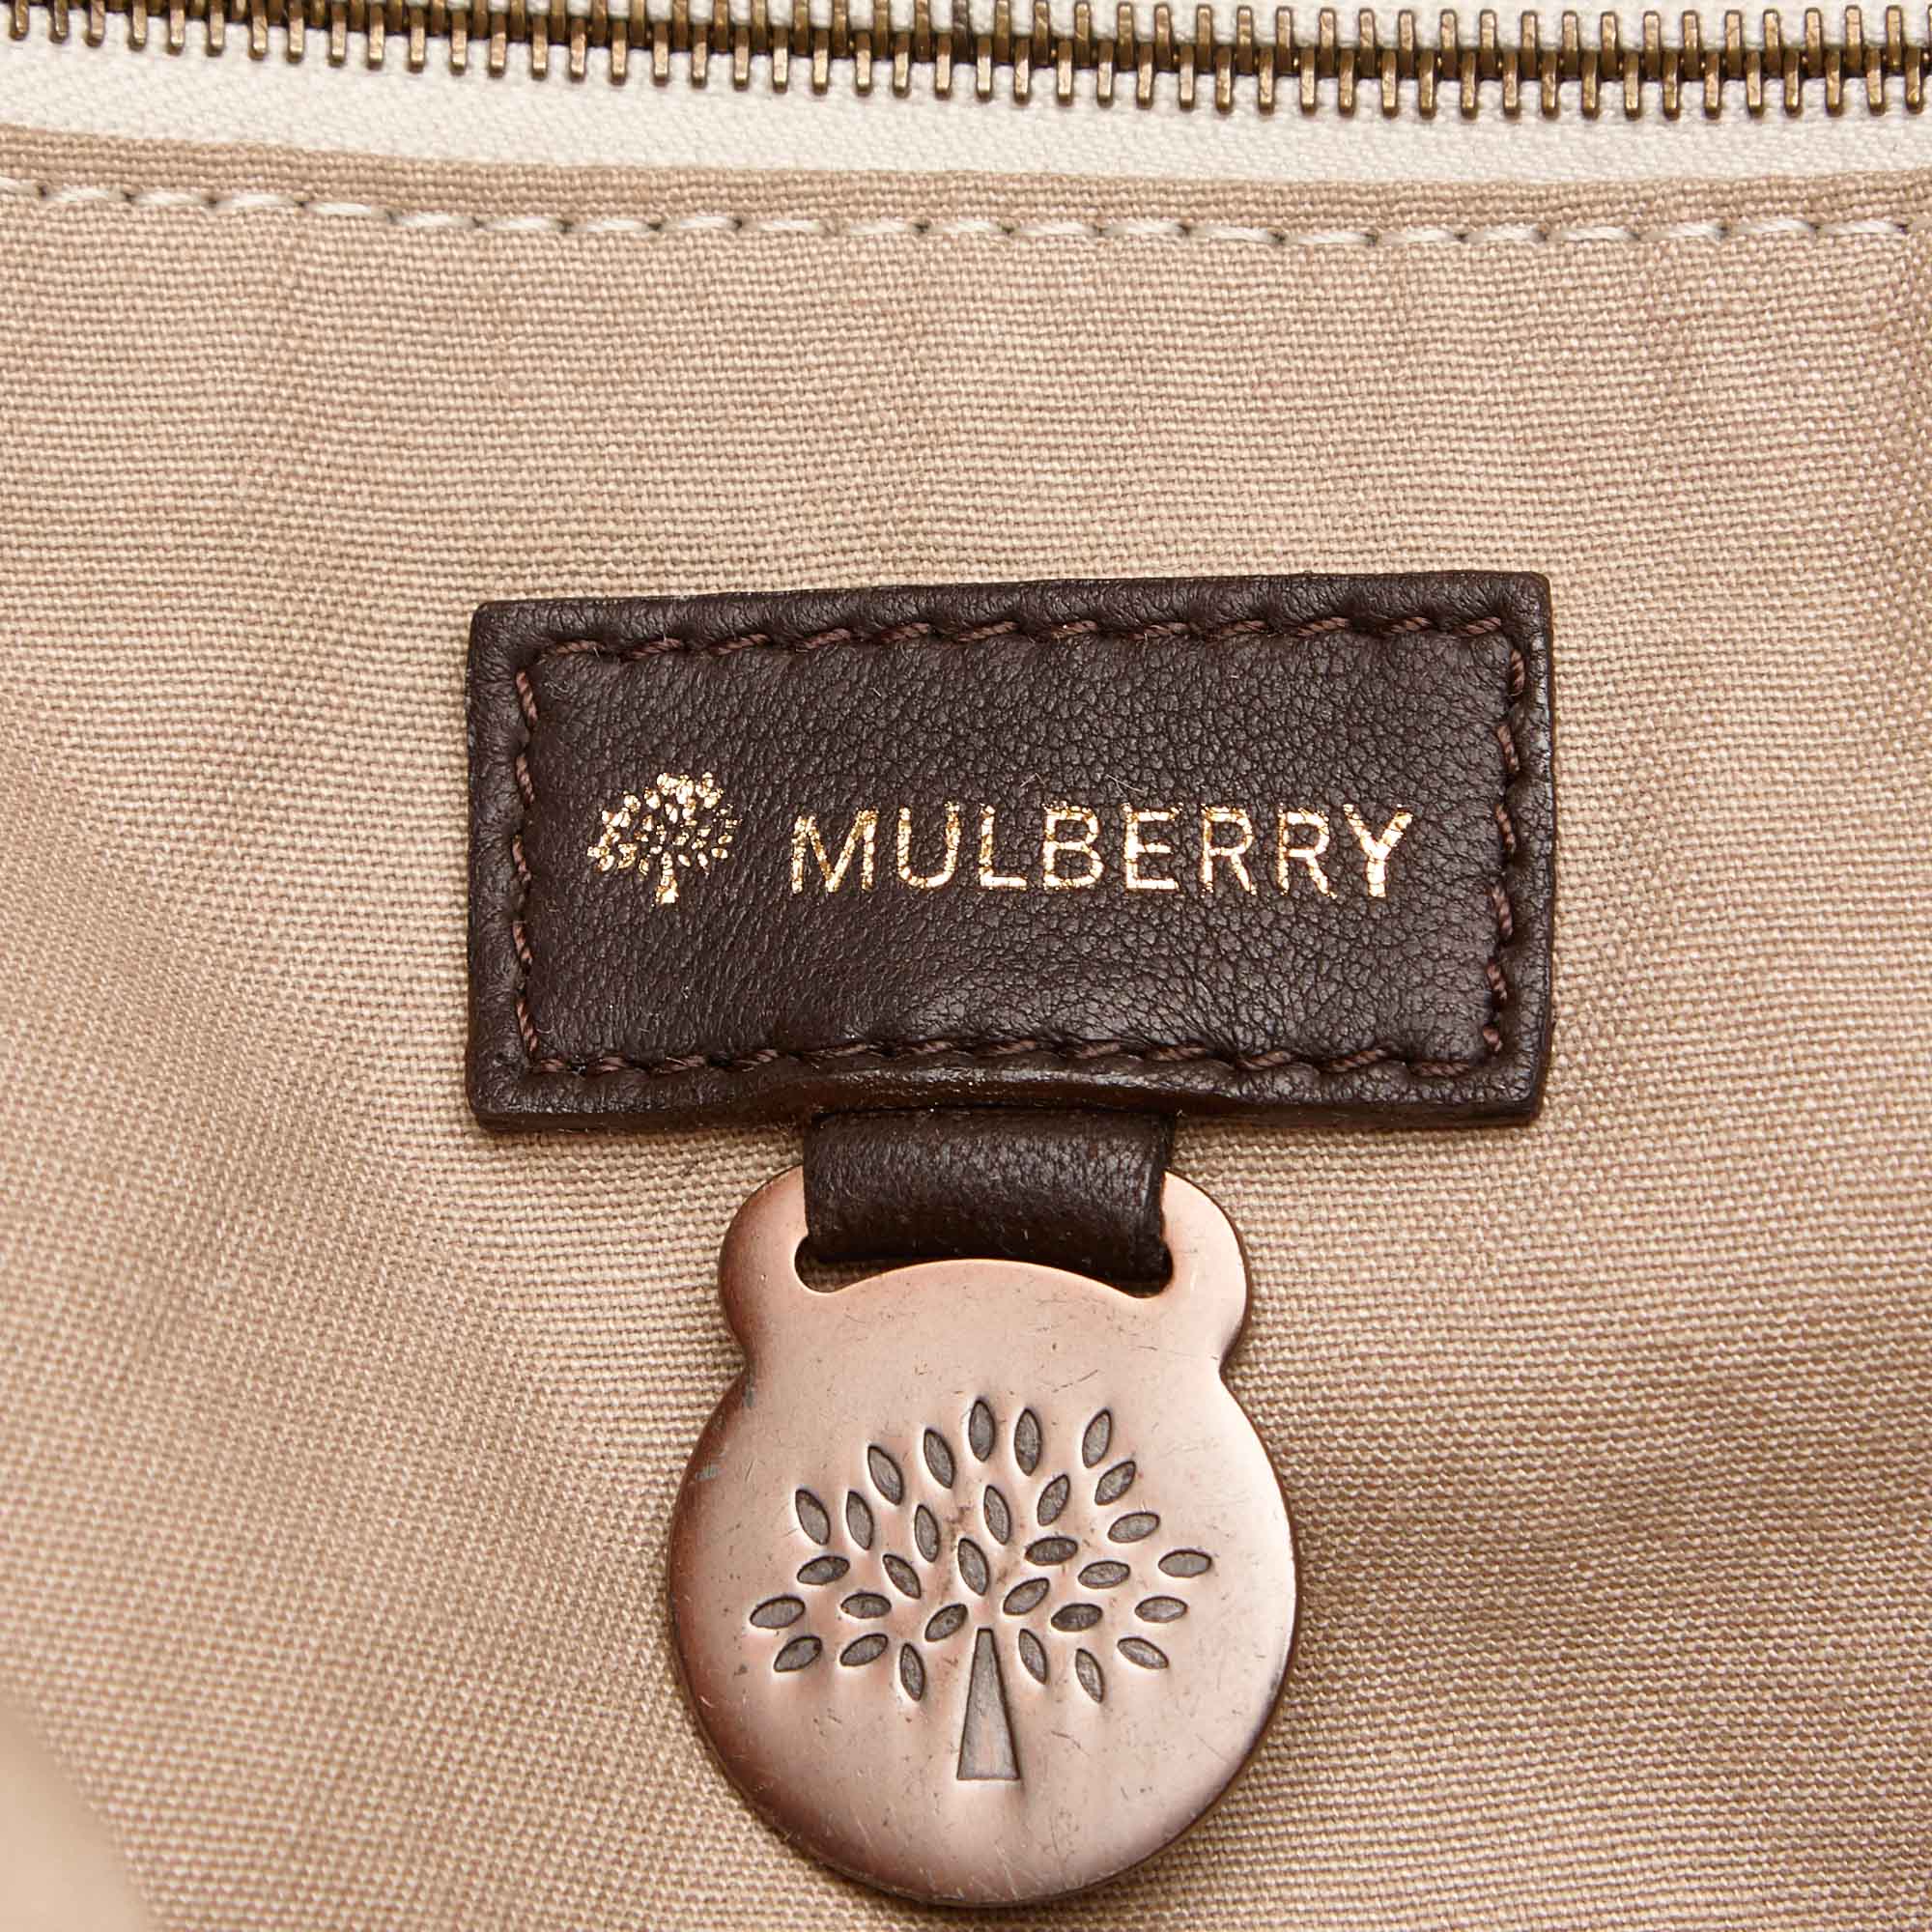 Burberry and Mulberry face branding challenges in luxury market | Media &  Tech Network | The Guardian